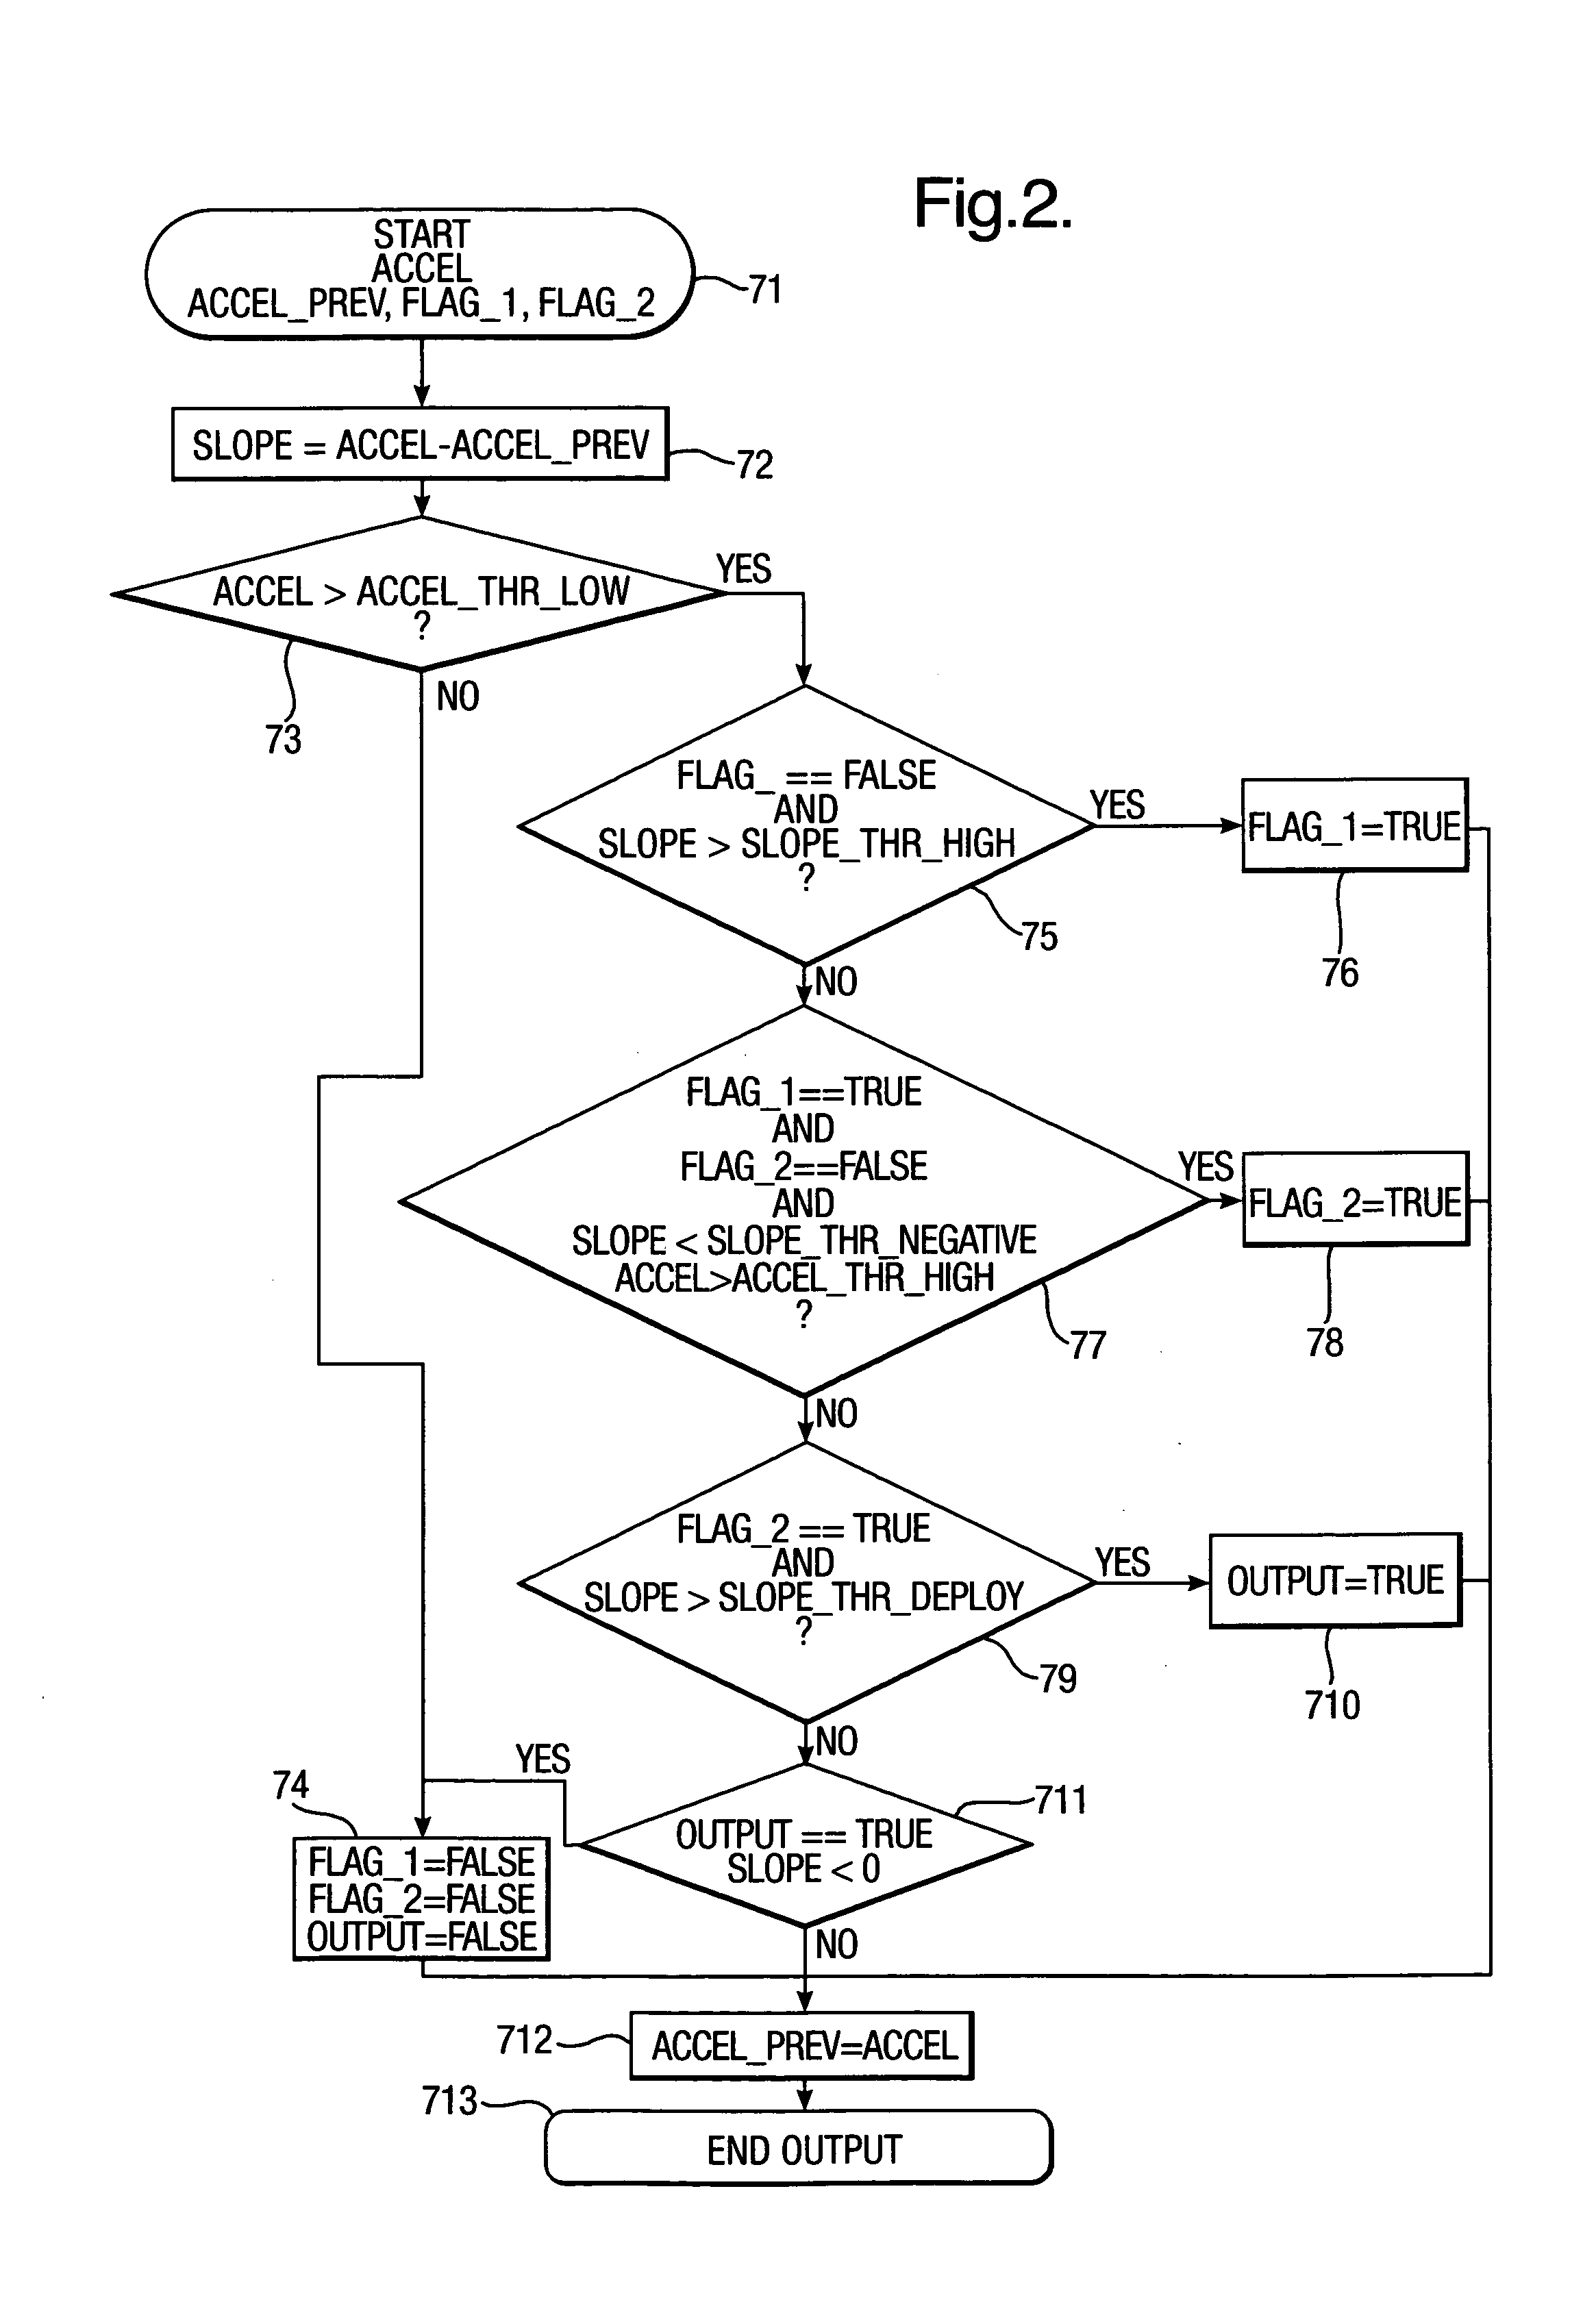 Method and system for detecting a vehicle rollover, in particular a soil trip rollover